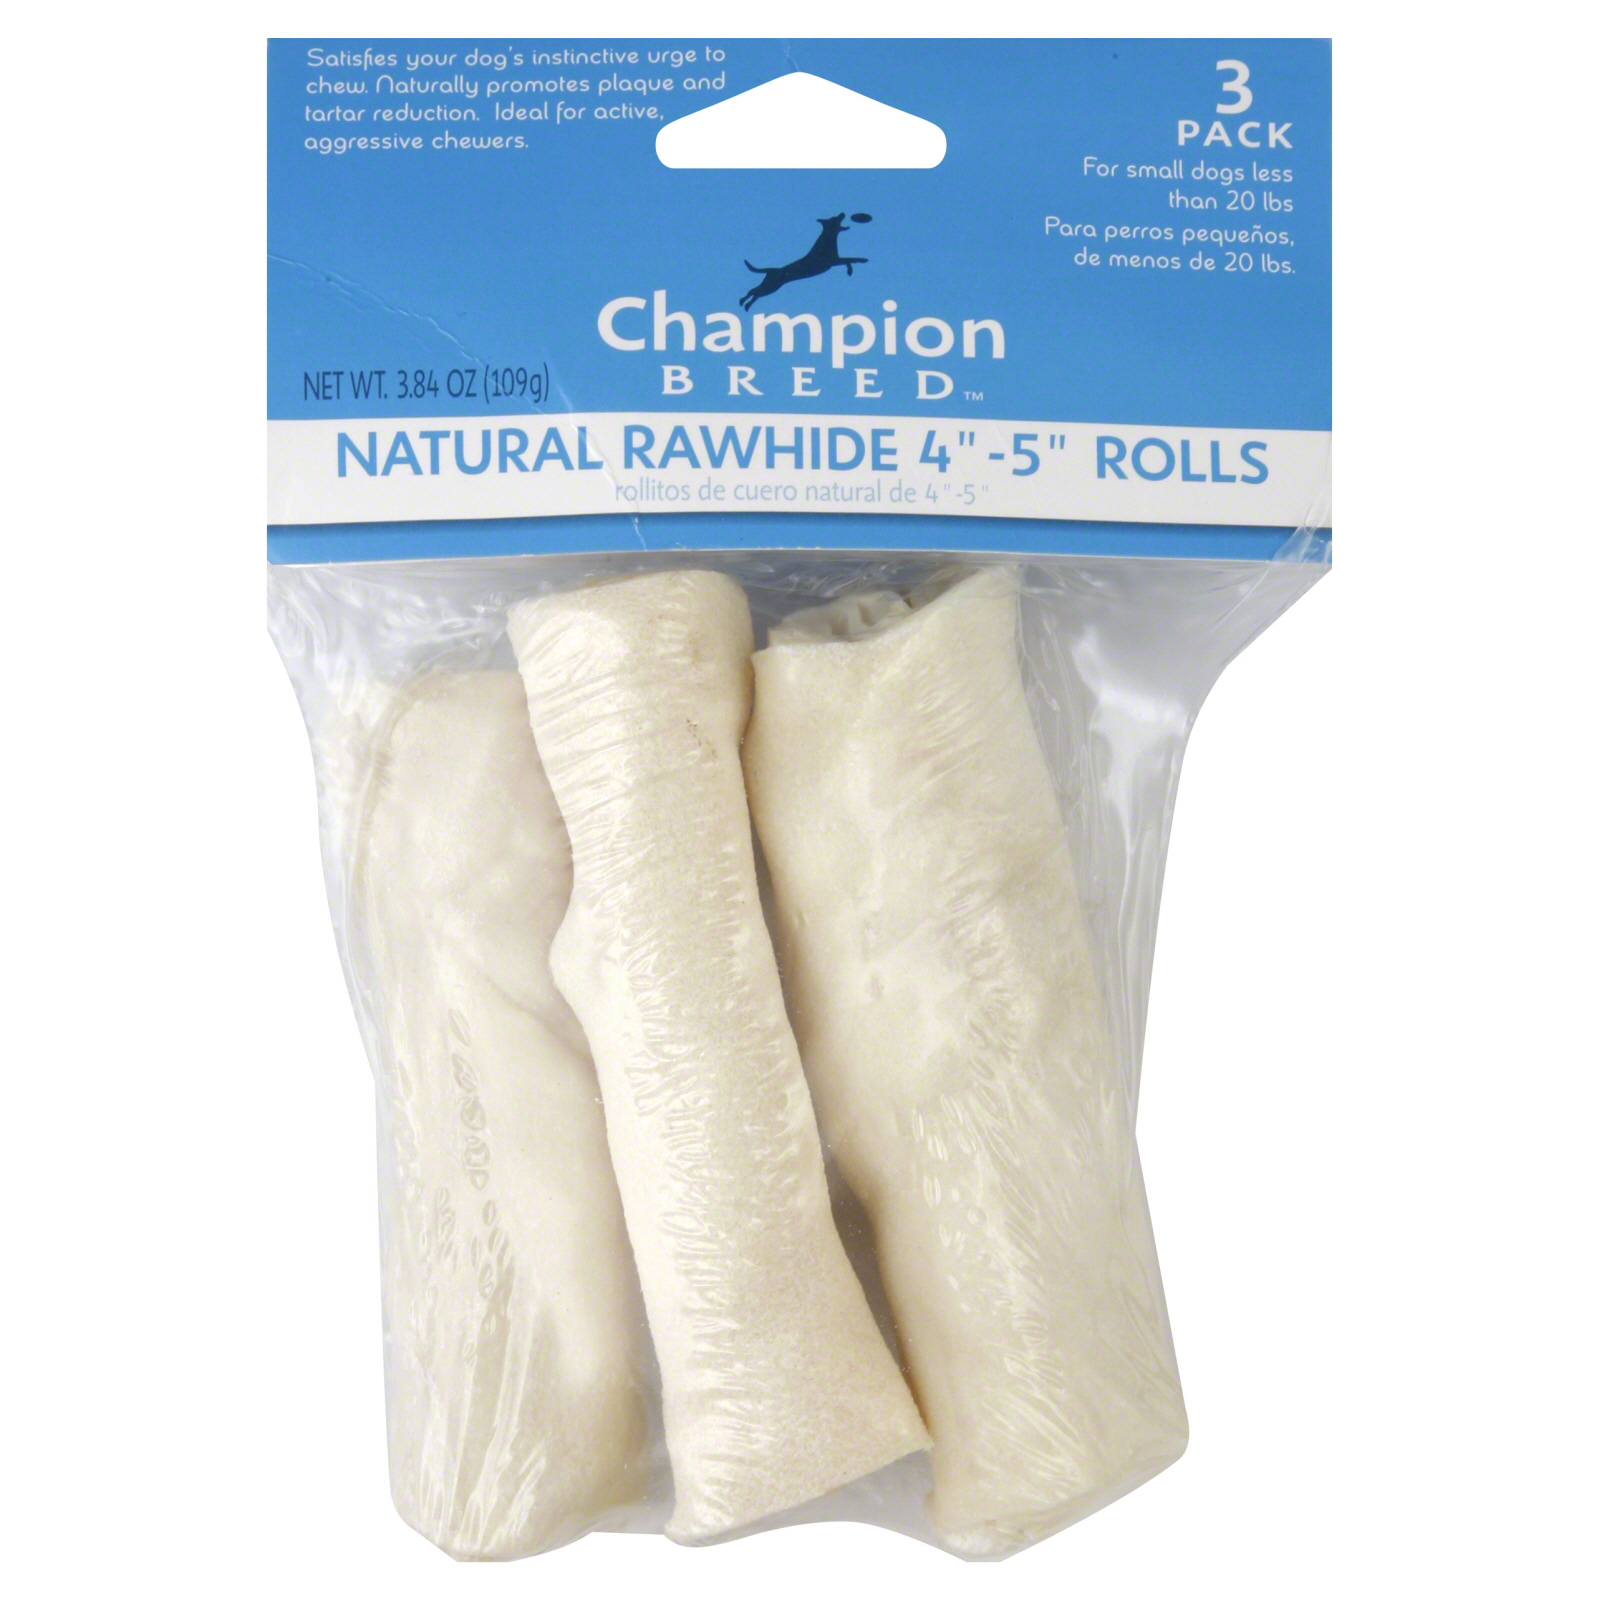 Champion Breed Natural Rawhide Rolls 4"-5" 3-Pack